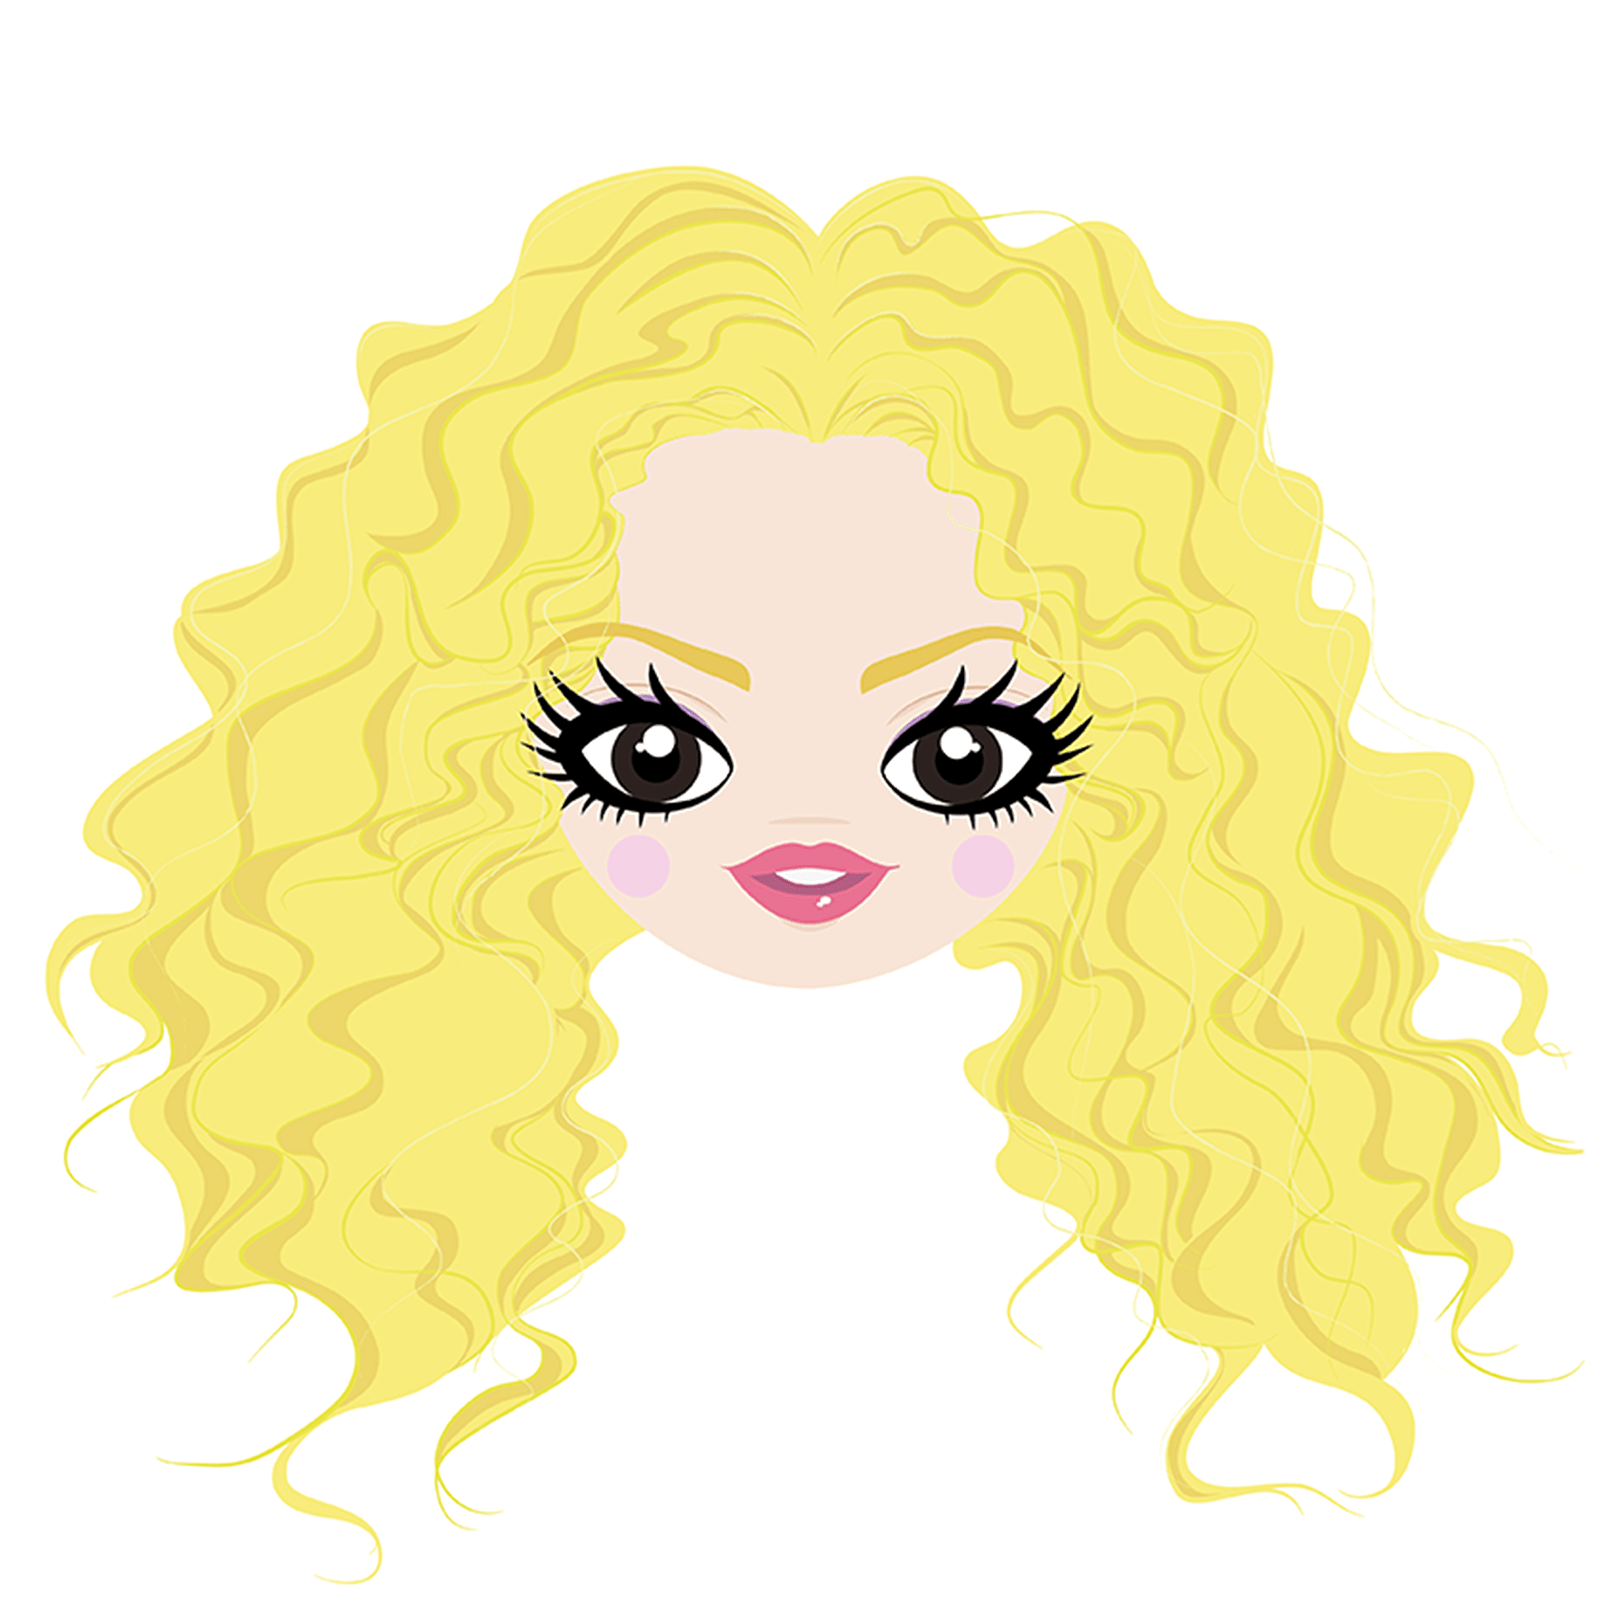 Shakira comic style: The songstress many hair styles in cute illustration